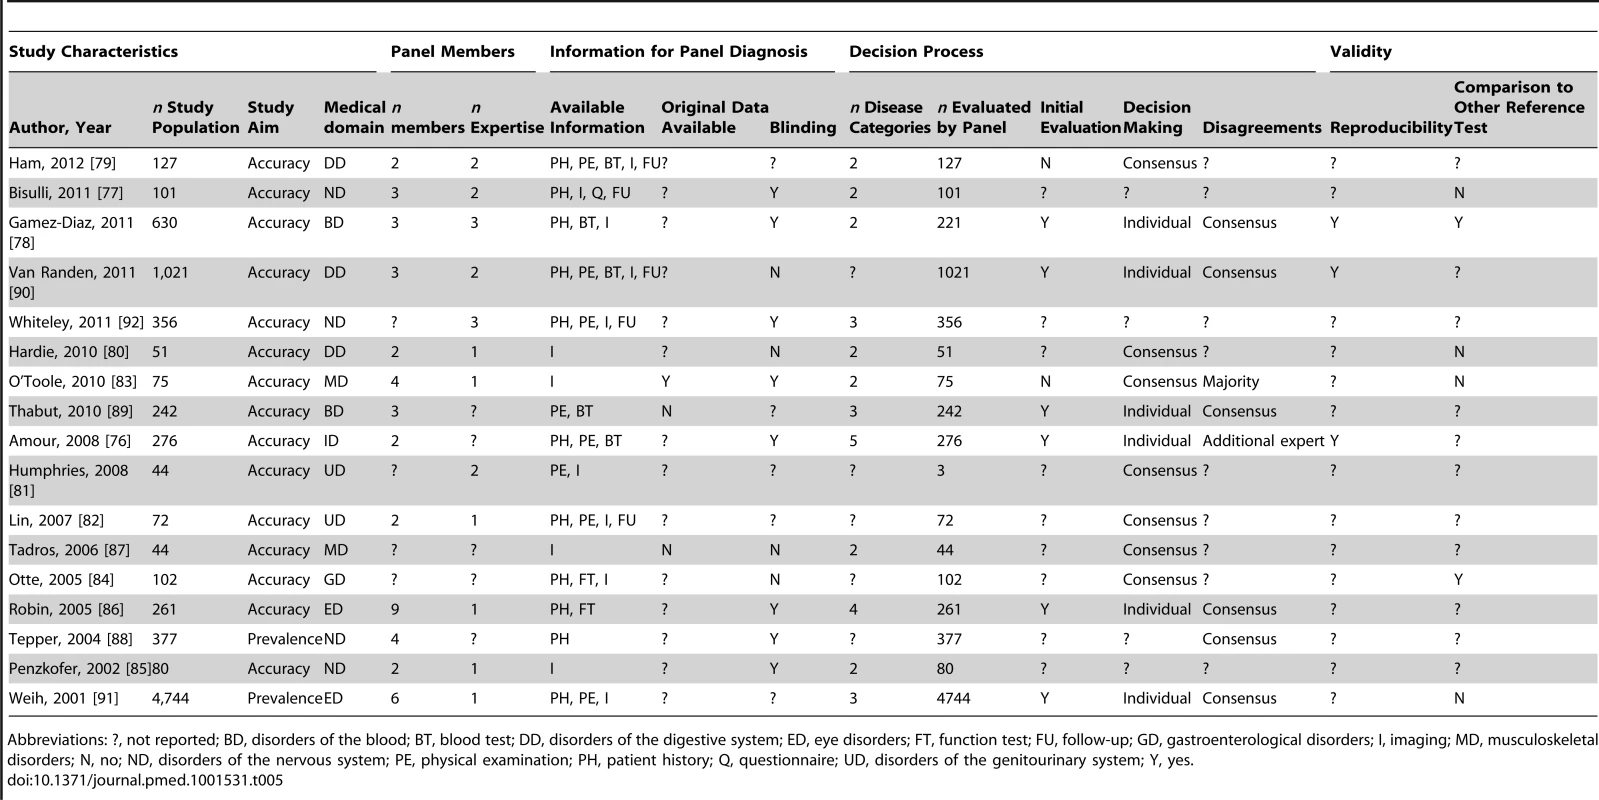 Study characteristics of articles assessing diseases from other medical domains, <i>n</i> = 17.